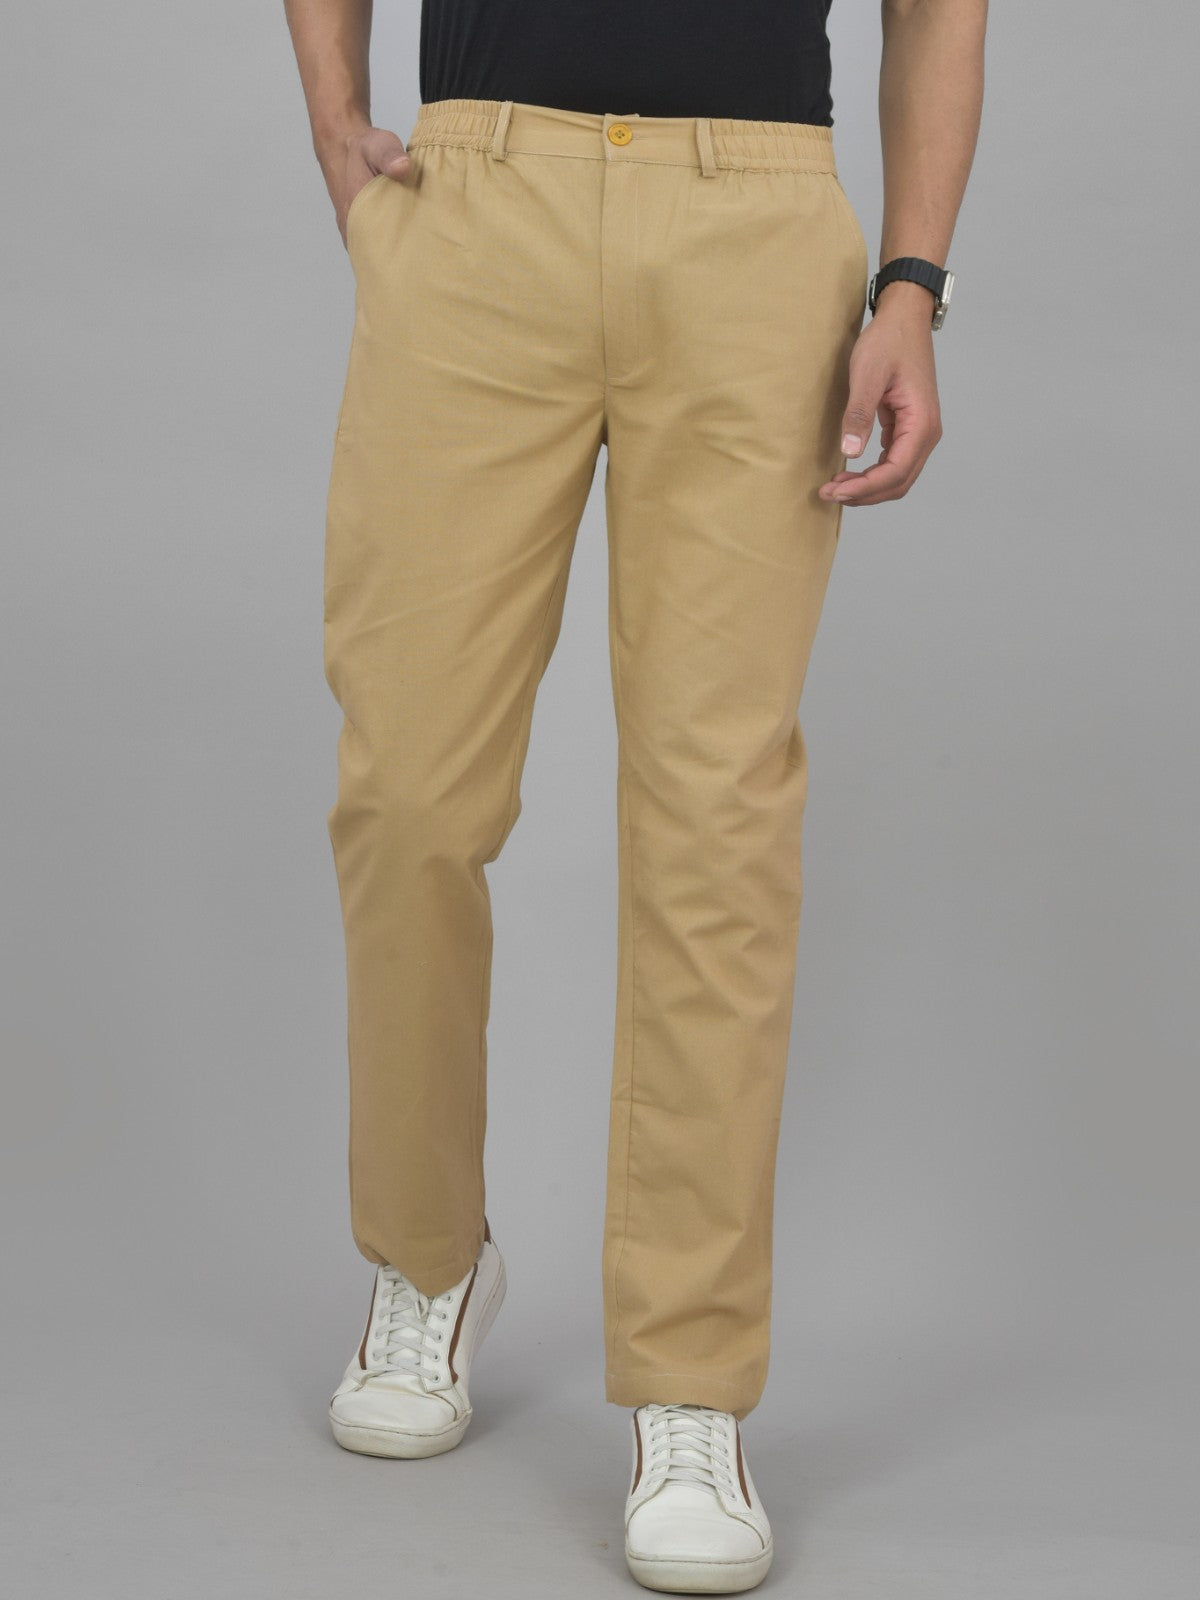 Combo Pack Of Mens Beige And White Regualr Fit Cotton Trousers